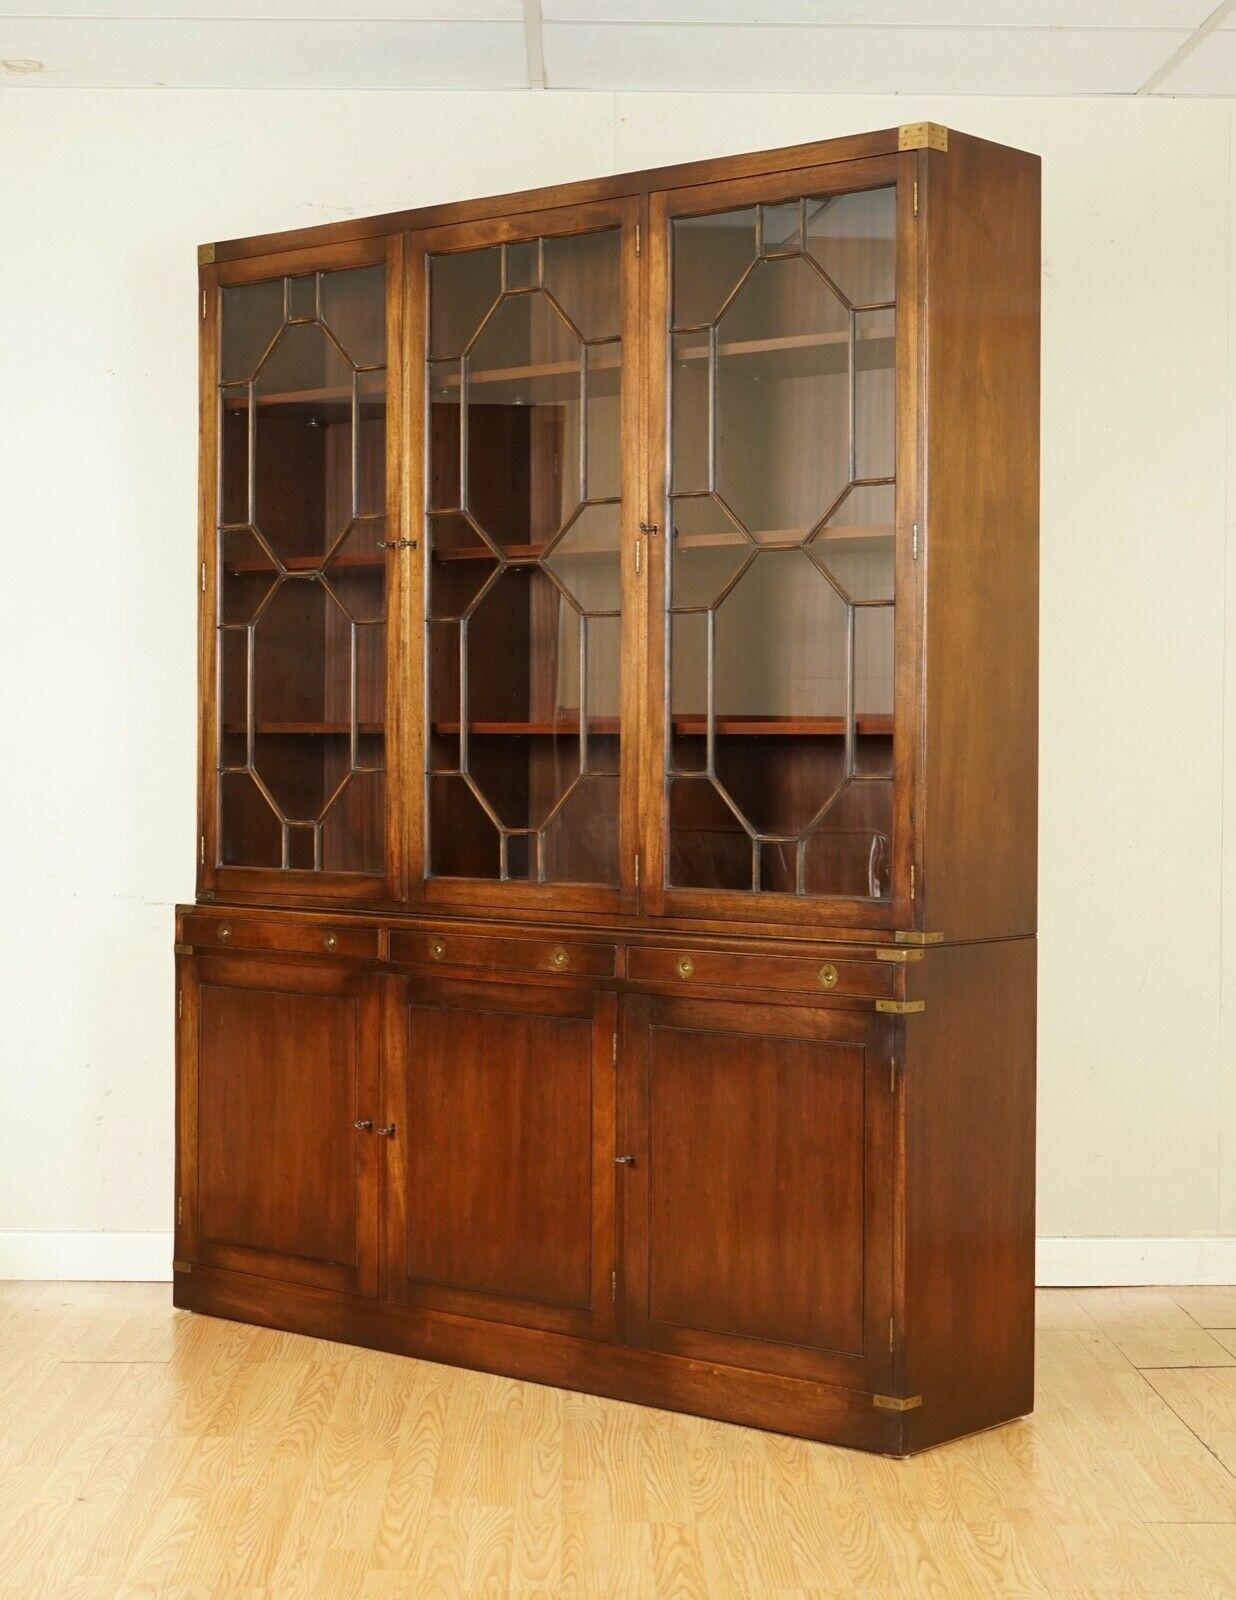 We are so excited to present to you this Outstanding Kennedy Furniture for Harrods London Campaign Library Bookcase.

A very good looking well-made and decorative bookcase. 

Retailed through Harrods London, it’s made in the Military Campaign